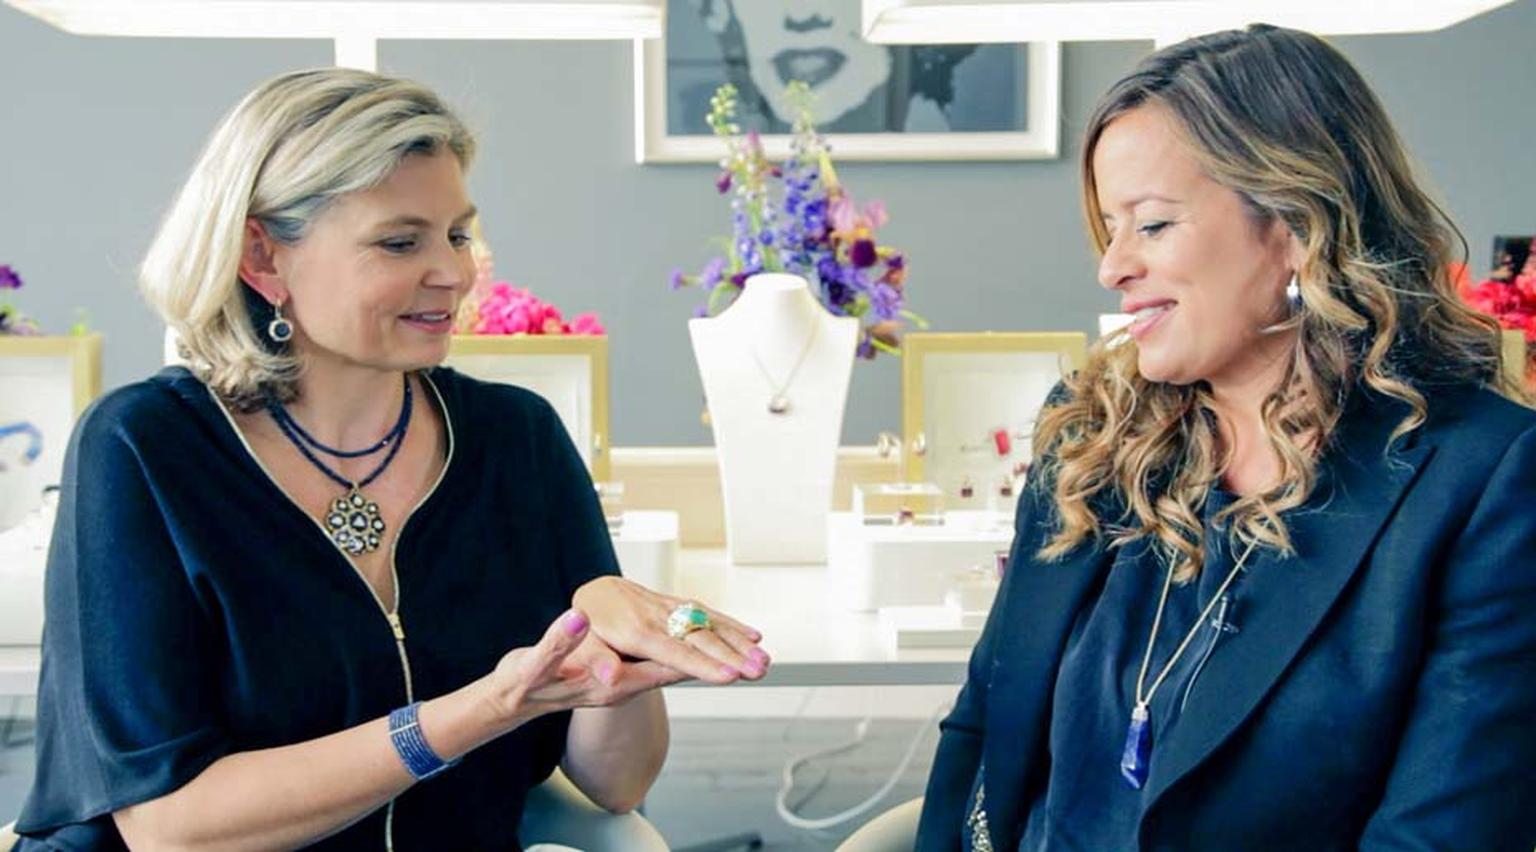 Jade Jagger discusses her confident and bold new Never Ending jewellery collection telling Maria, “There is a naturalness about women that I like and I feel that being true to yourself is important. I want to inspire women to be confident with their true 